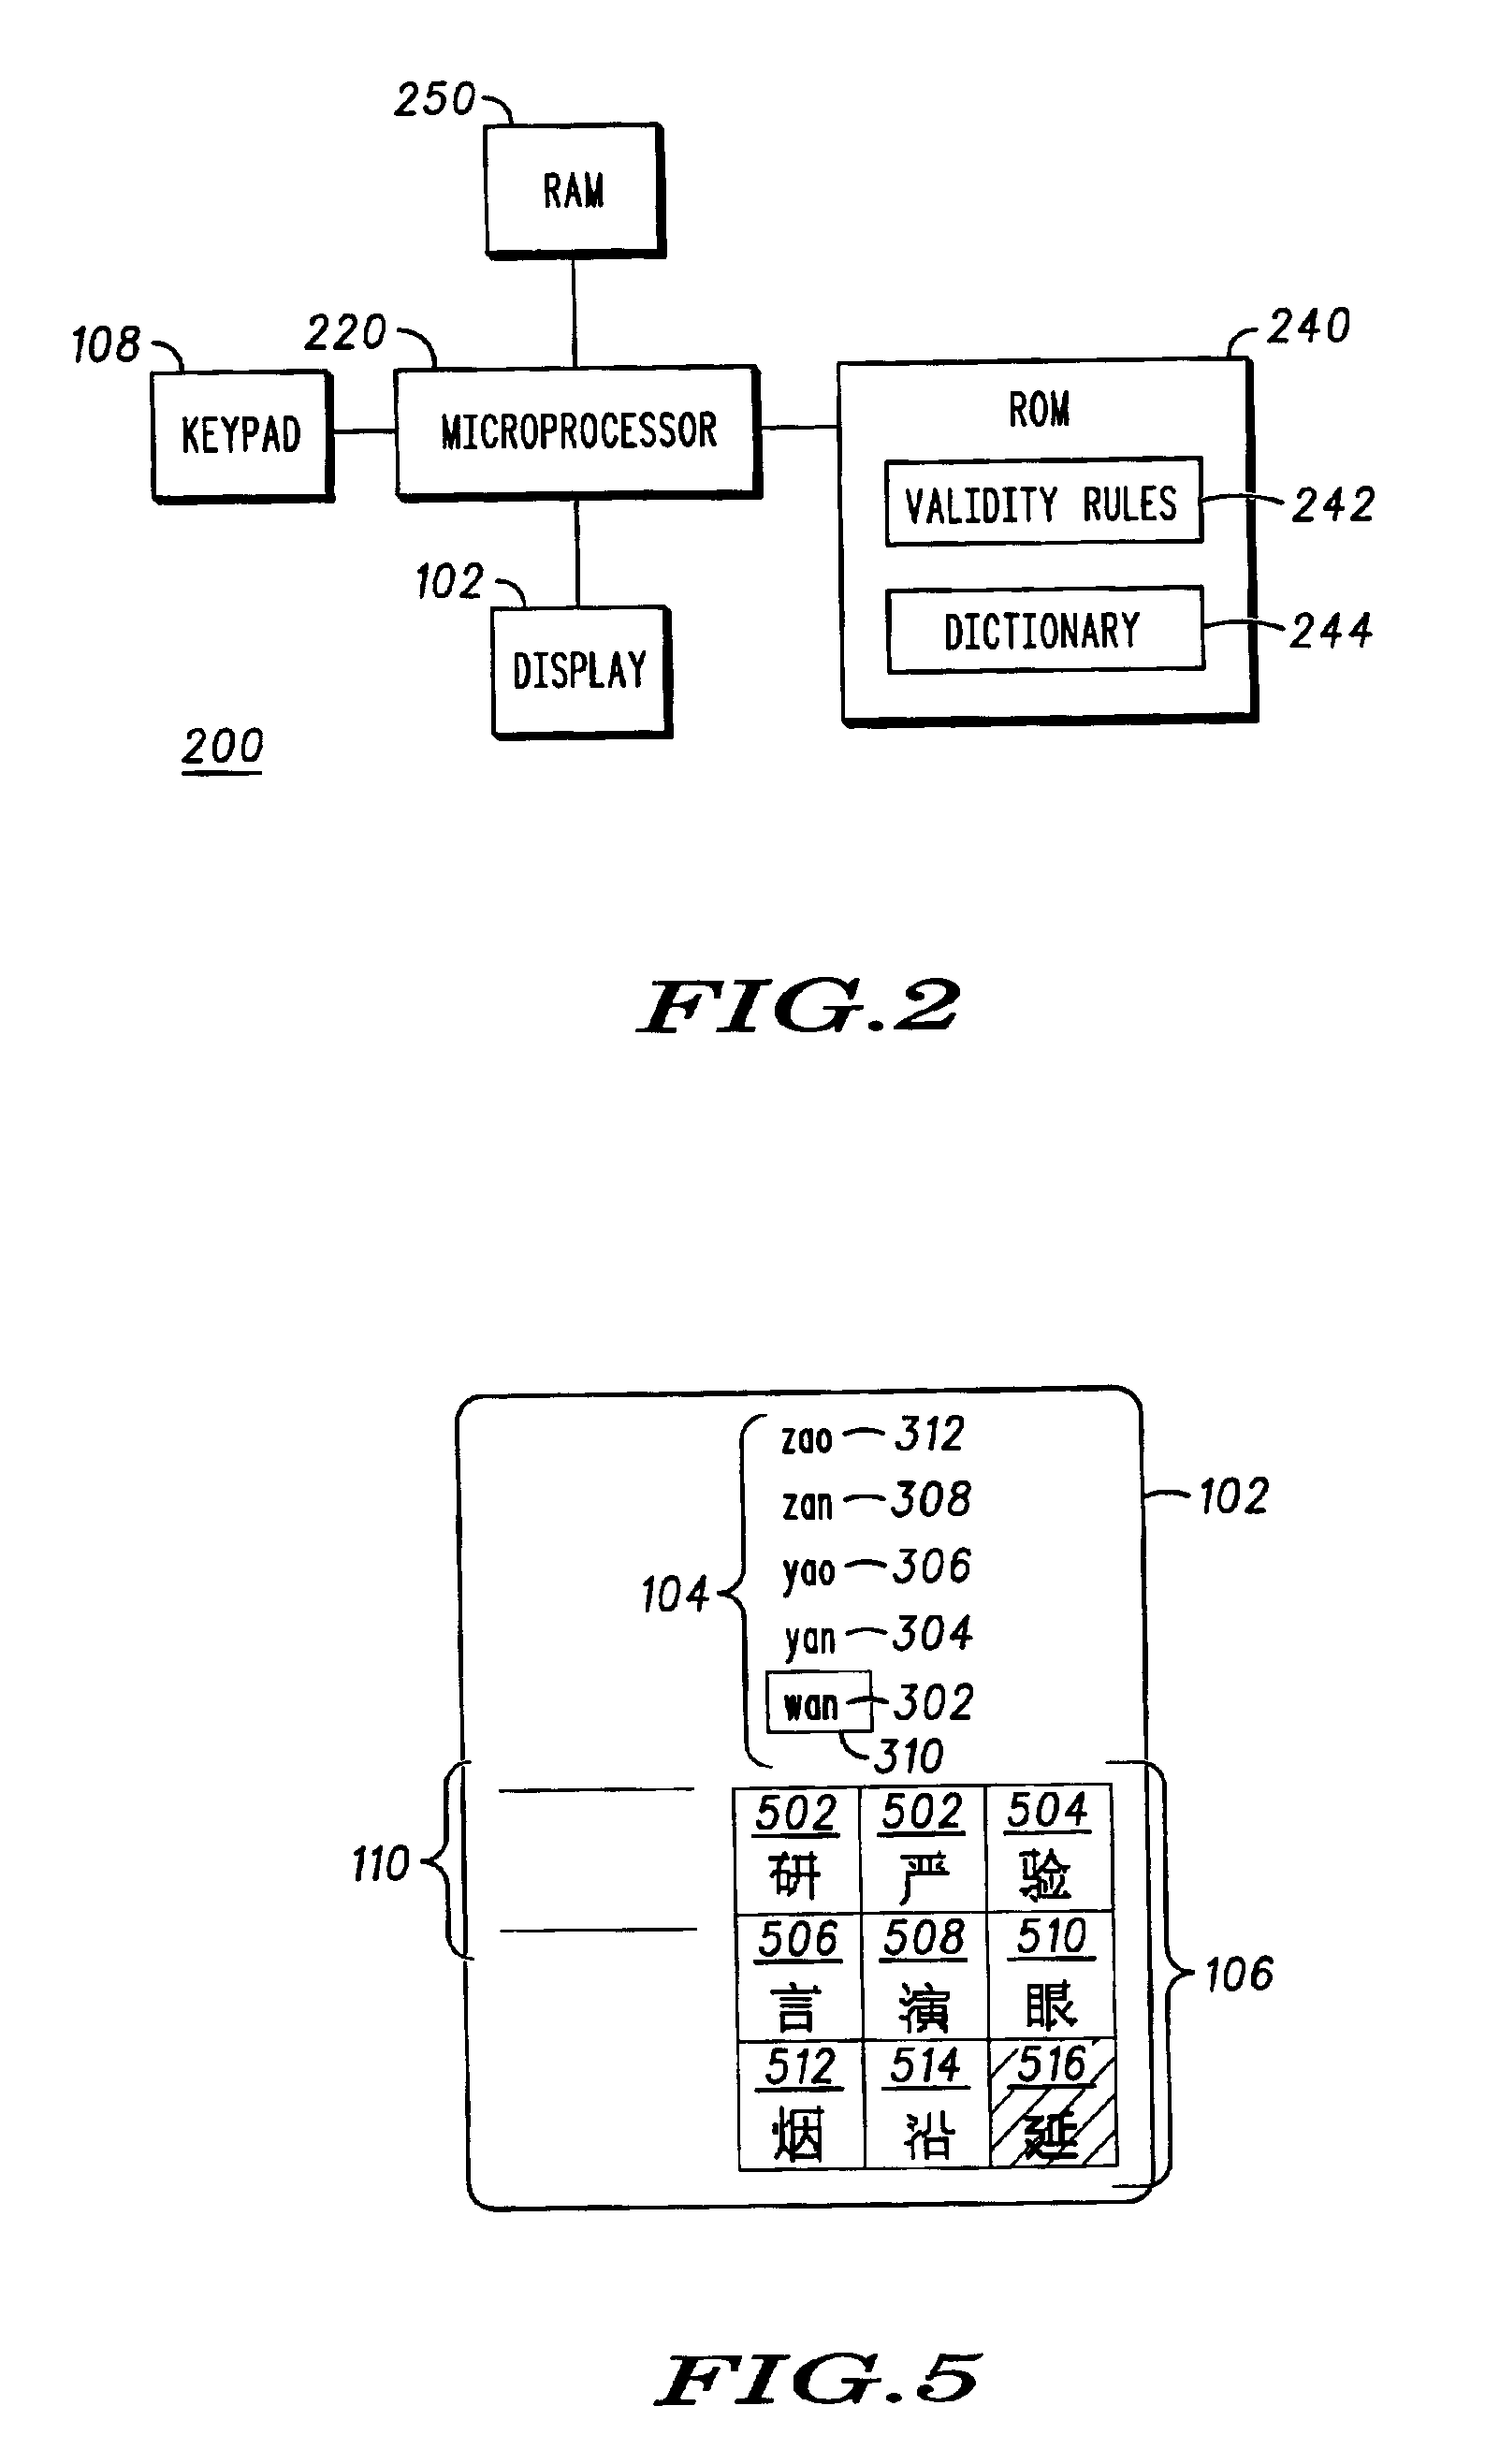 Method and apparatus for character entry in a wireless communication device